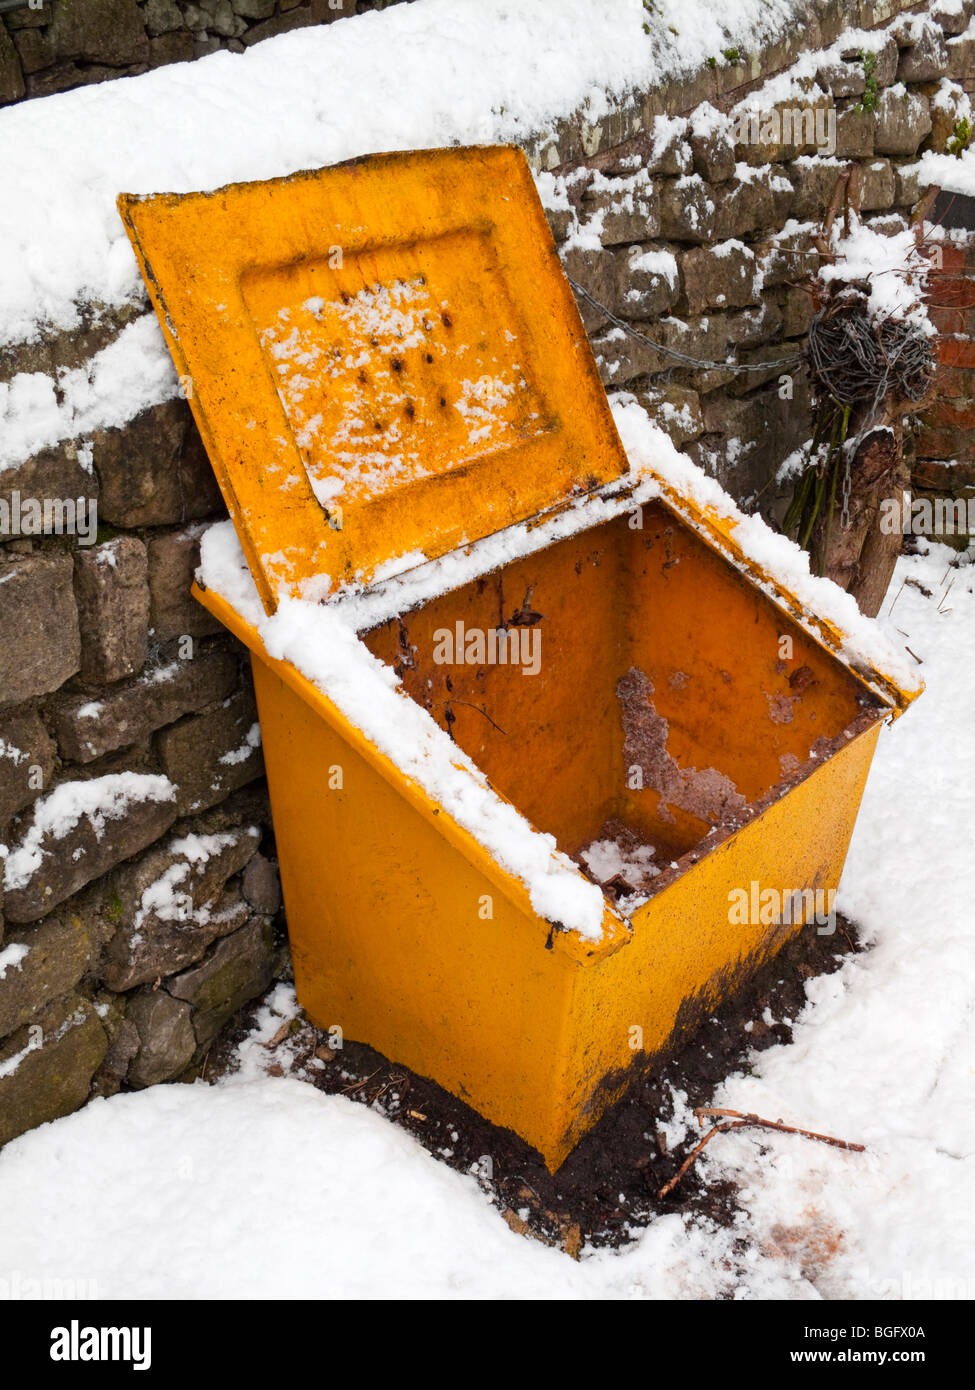 Empty grit bin used for gritting roads causing problems for motorists in Derbyshire during the harsh winter conditions of 2010 Stock Photo